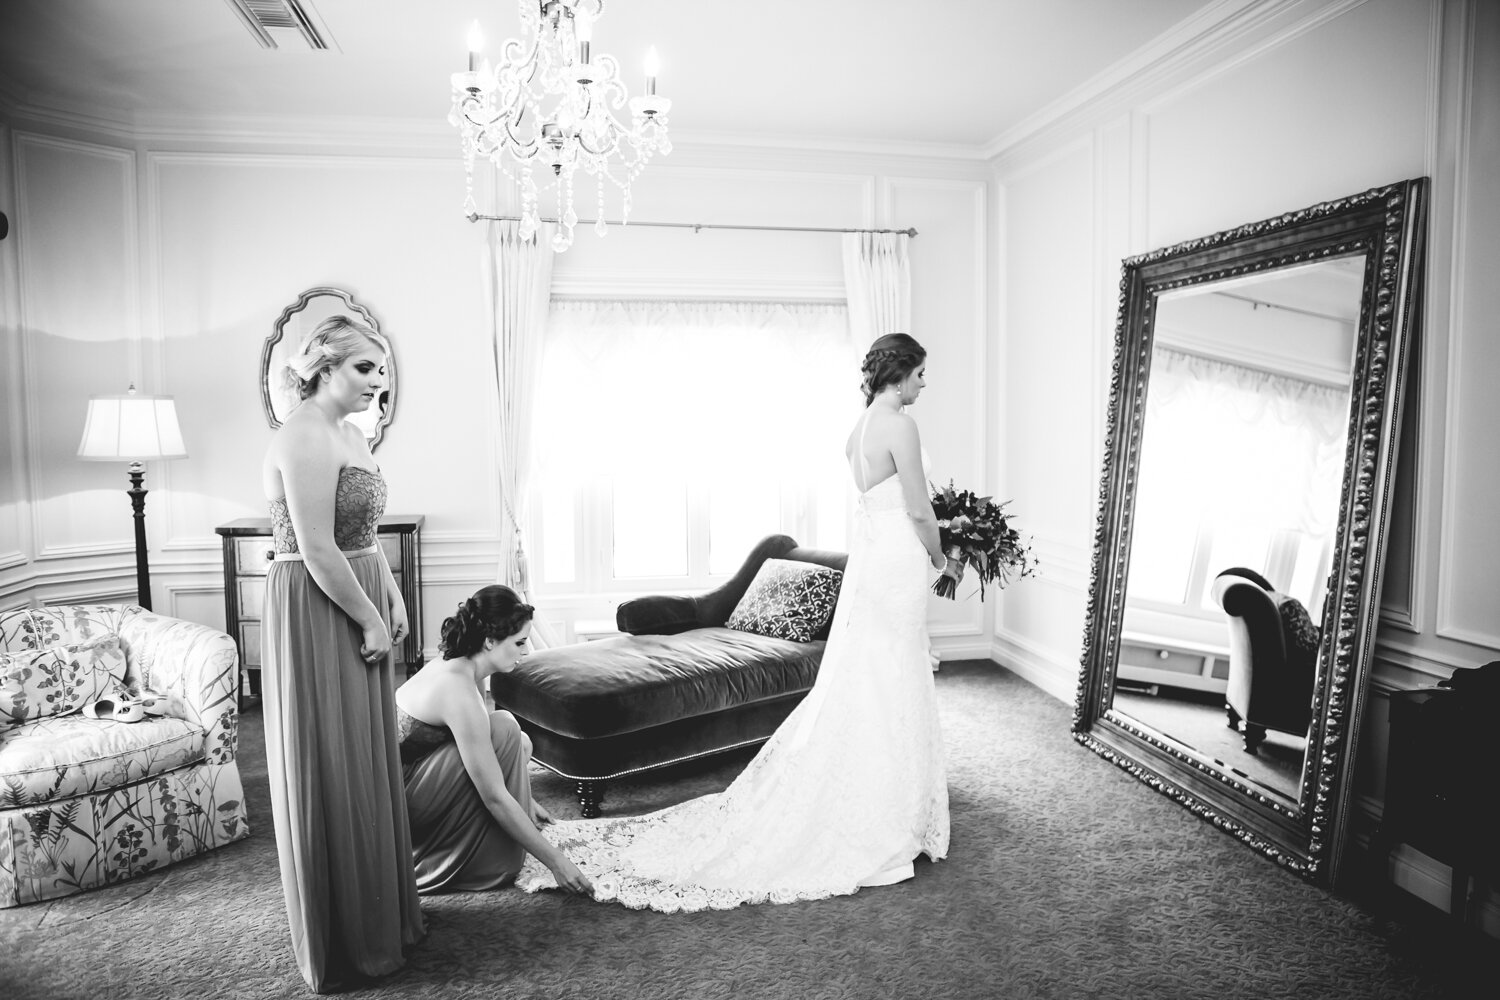  Bride getting ready in bridal suite at Highlands Ranch Mansion.&nbsp;Photographed by JMGant Photography, Denver Colorado wedding photographer.&nbsp; 